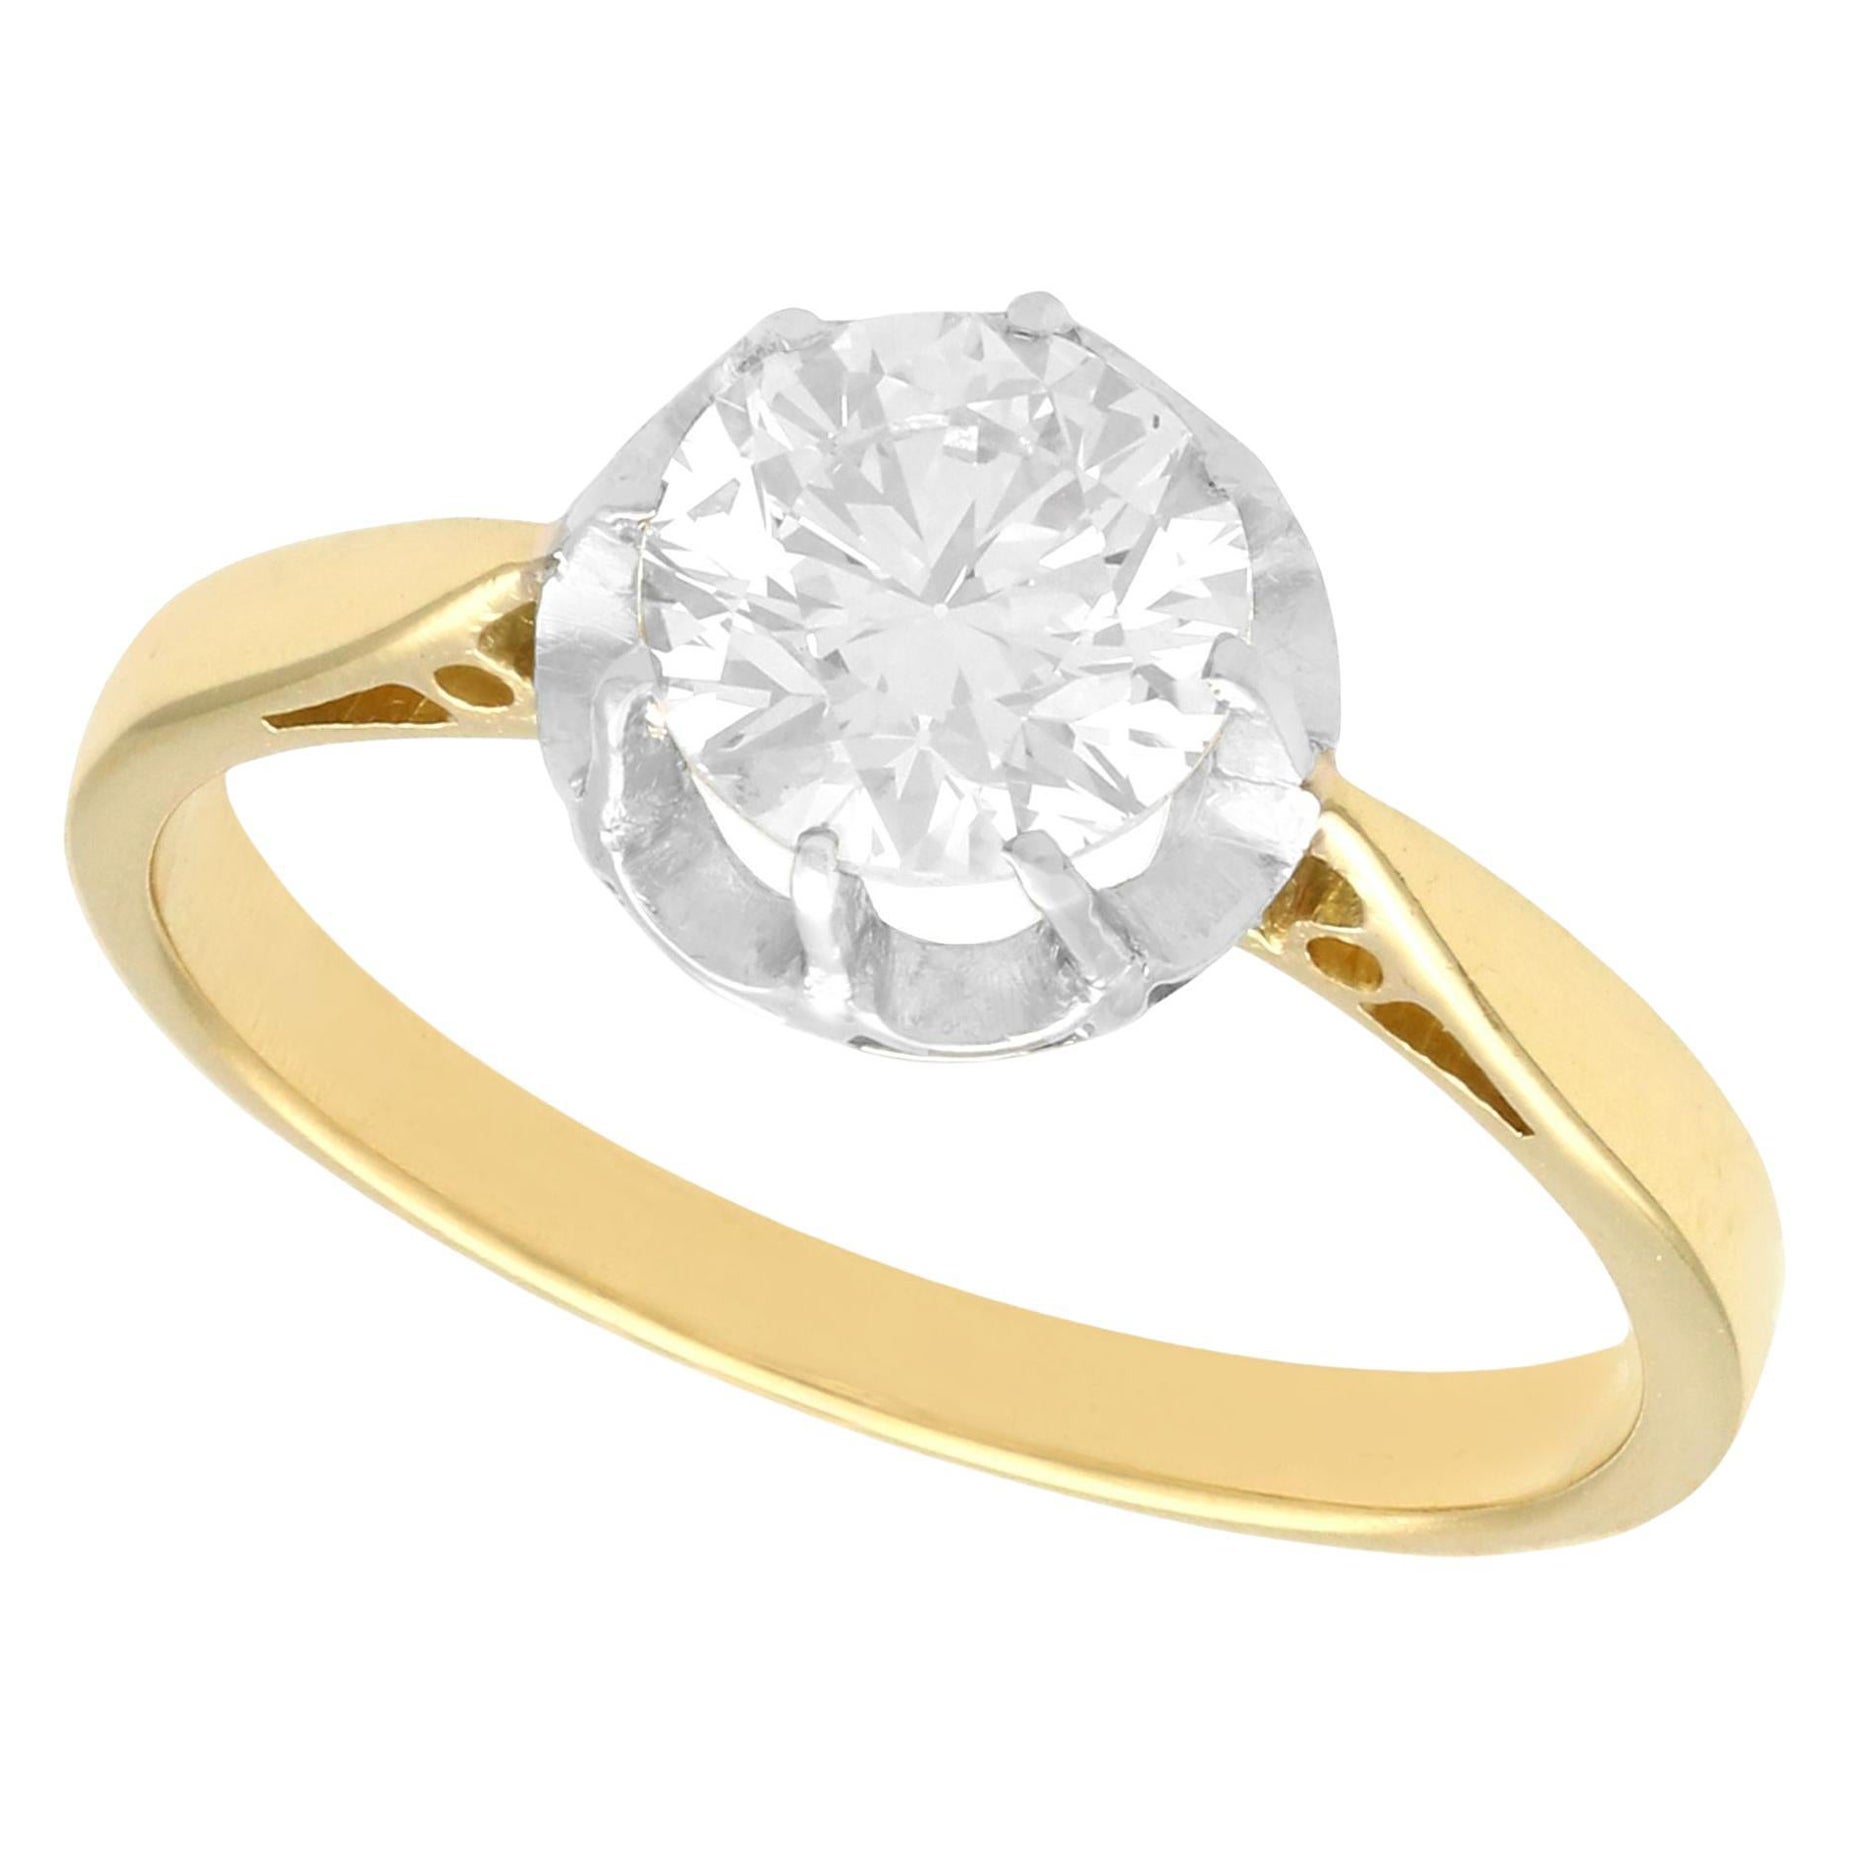 1920s 1.07 Carat Diamond and Yellow Gold Solitaire Engagement Ring For Sale